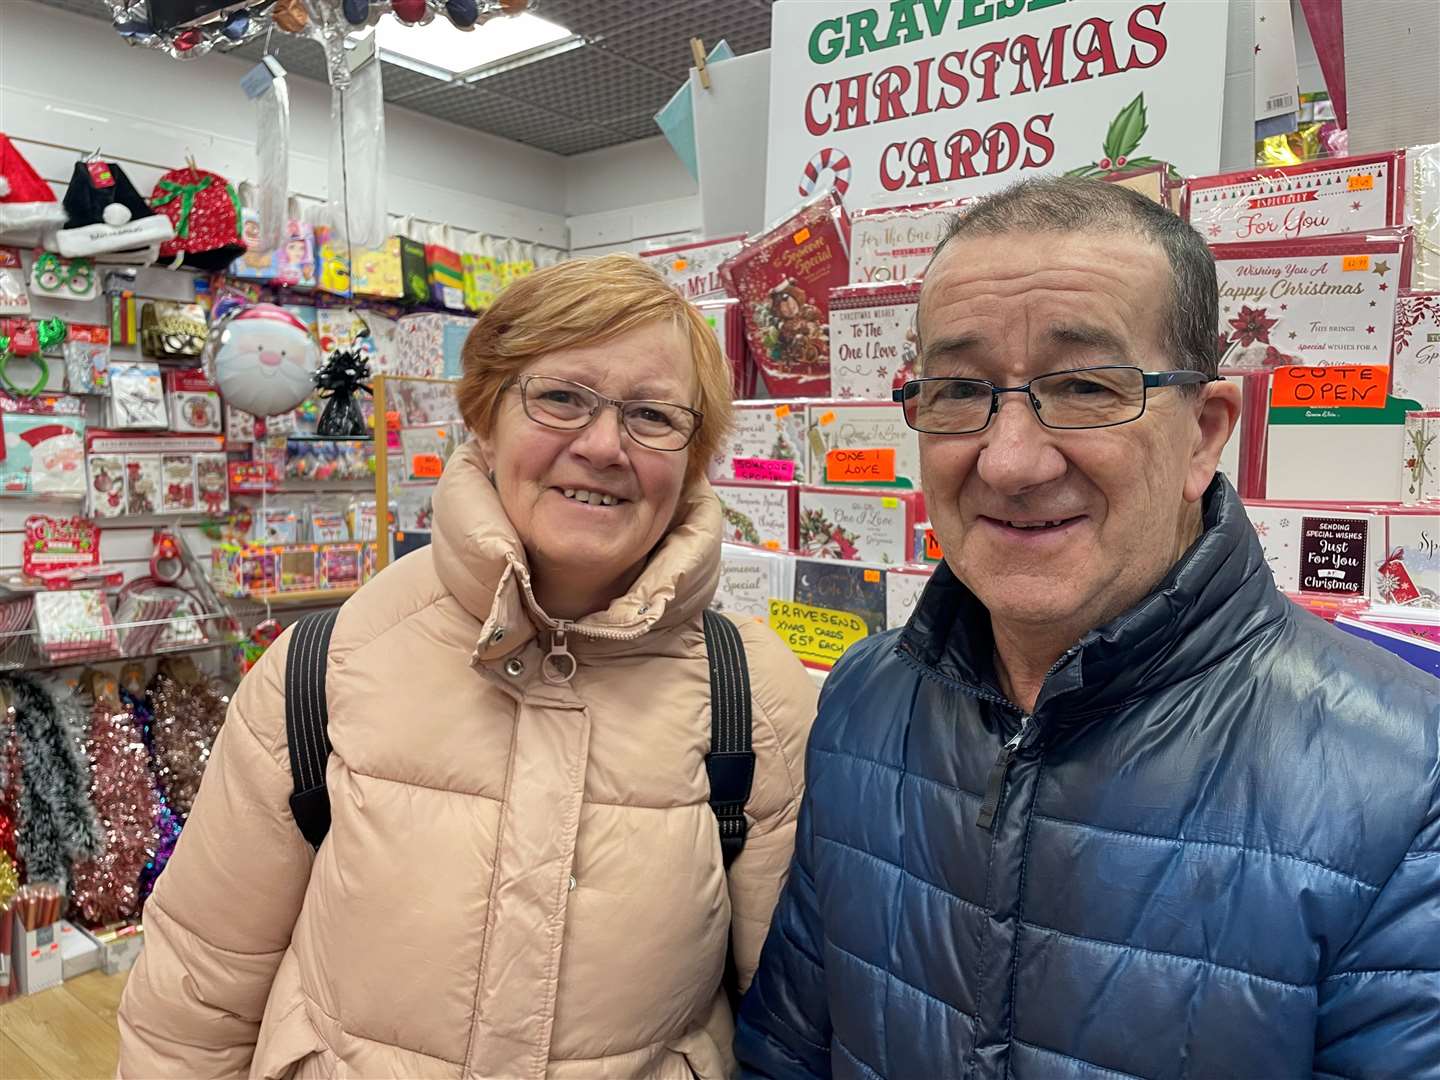 From left: Diana and David Hawkins said they still send Christmas cards